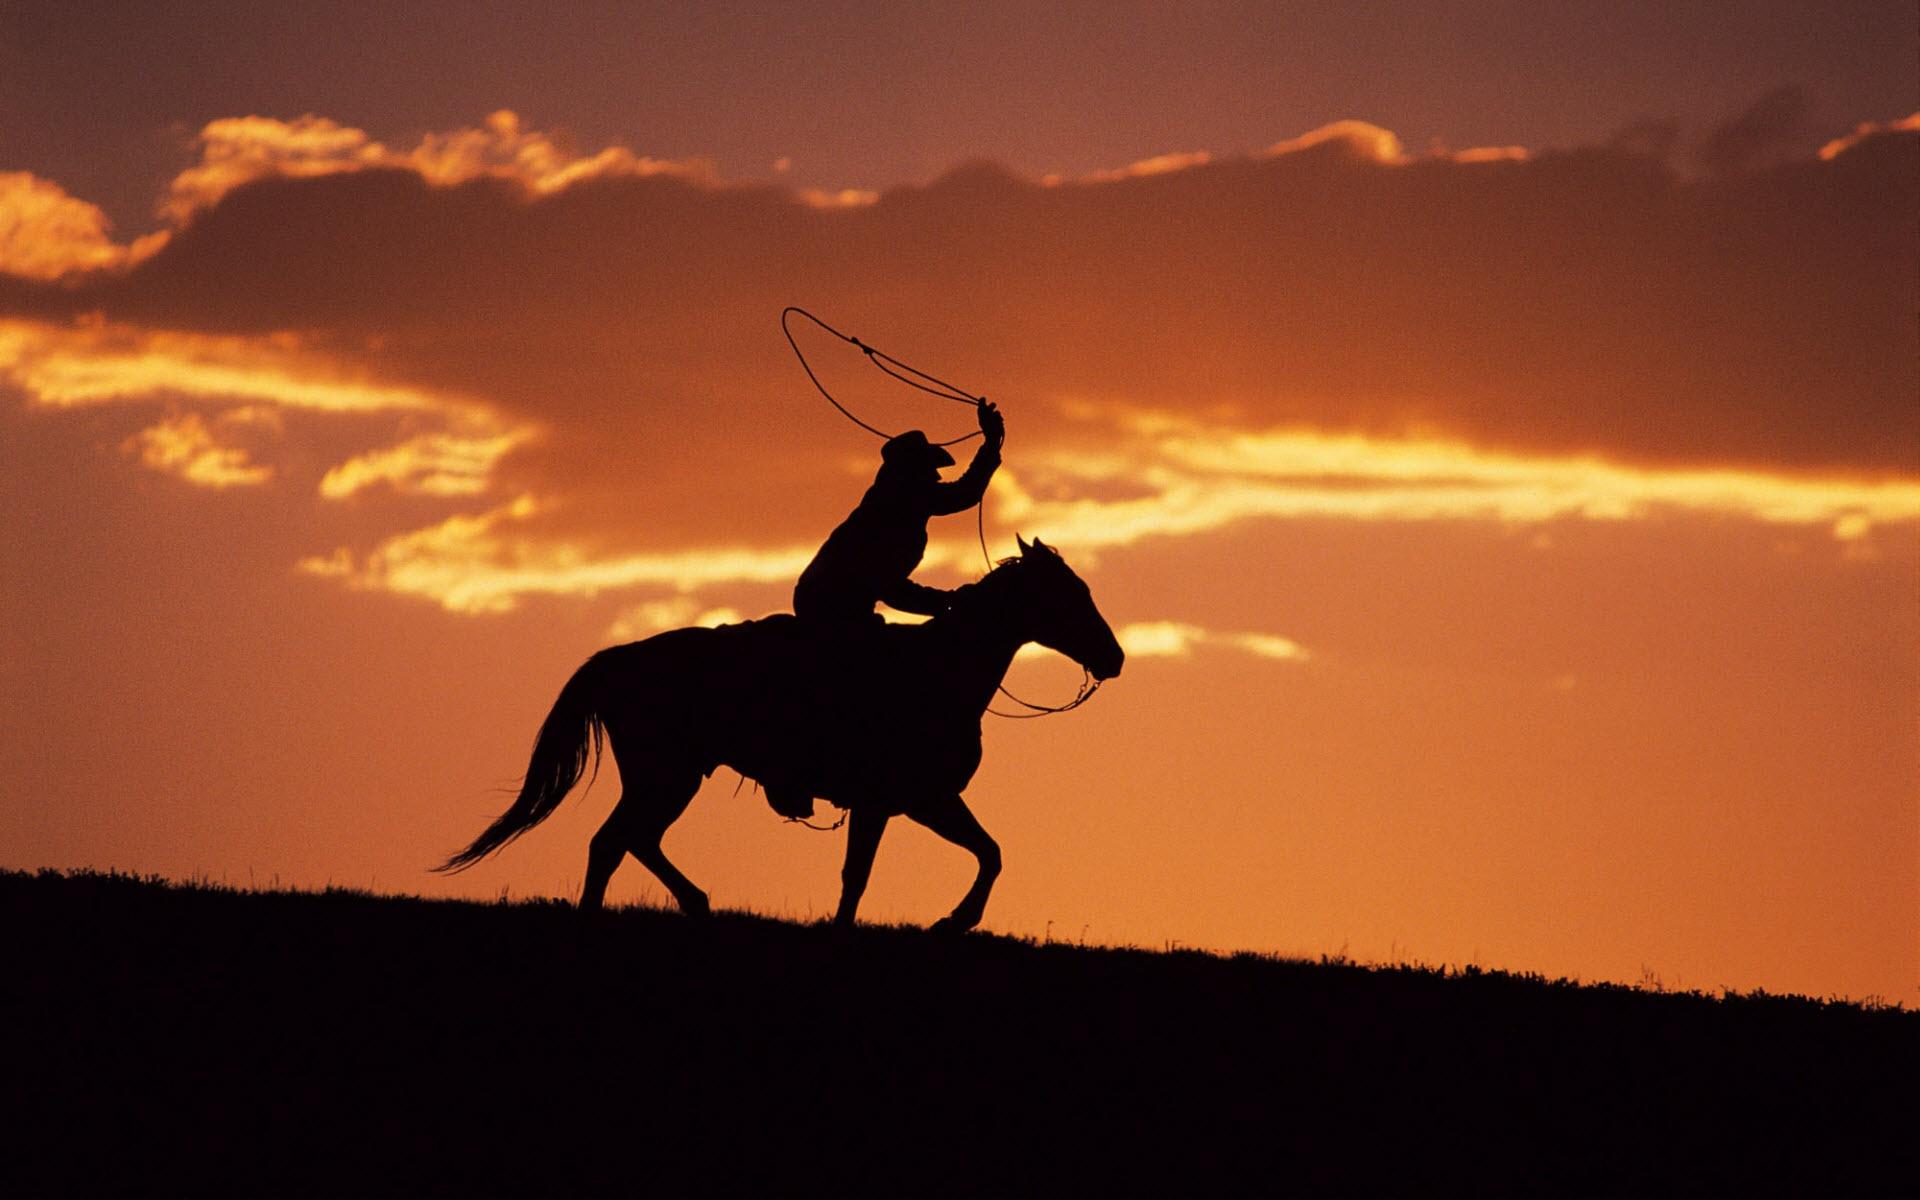 Western Cowboy at Sunset Wallpaper in jpg format for free download